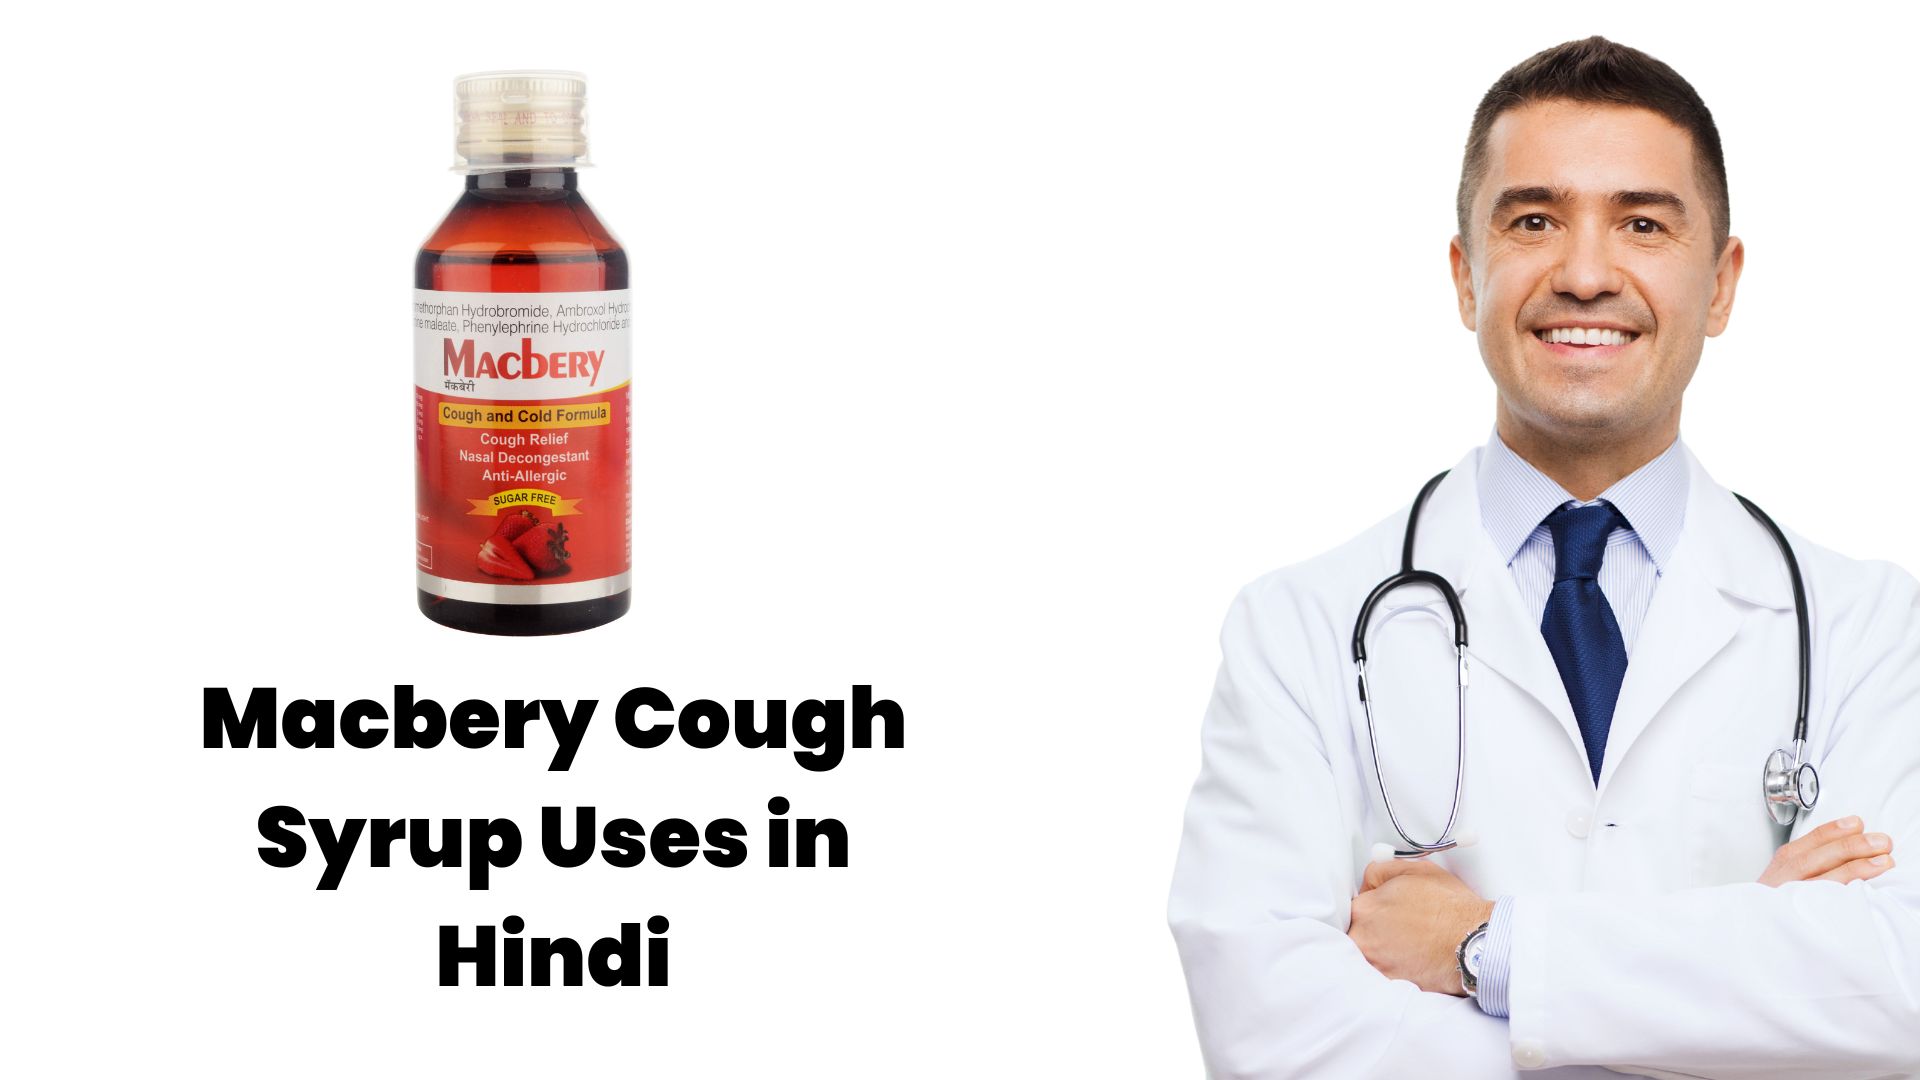 Macbery Cough Syrup Uses in Hindi